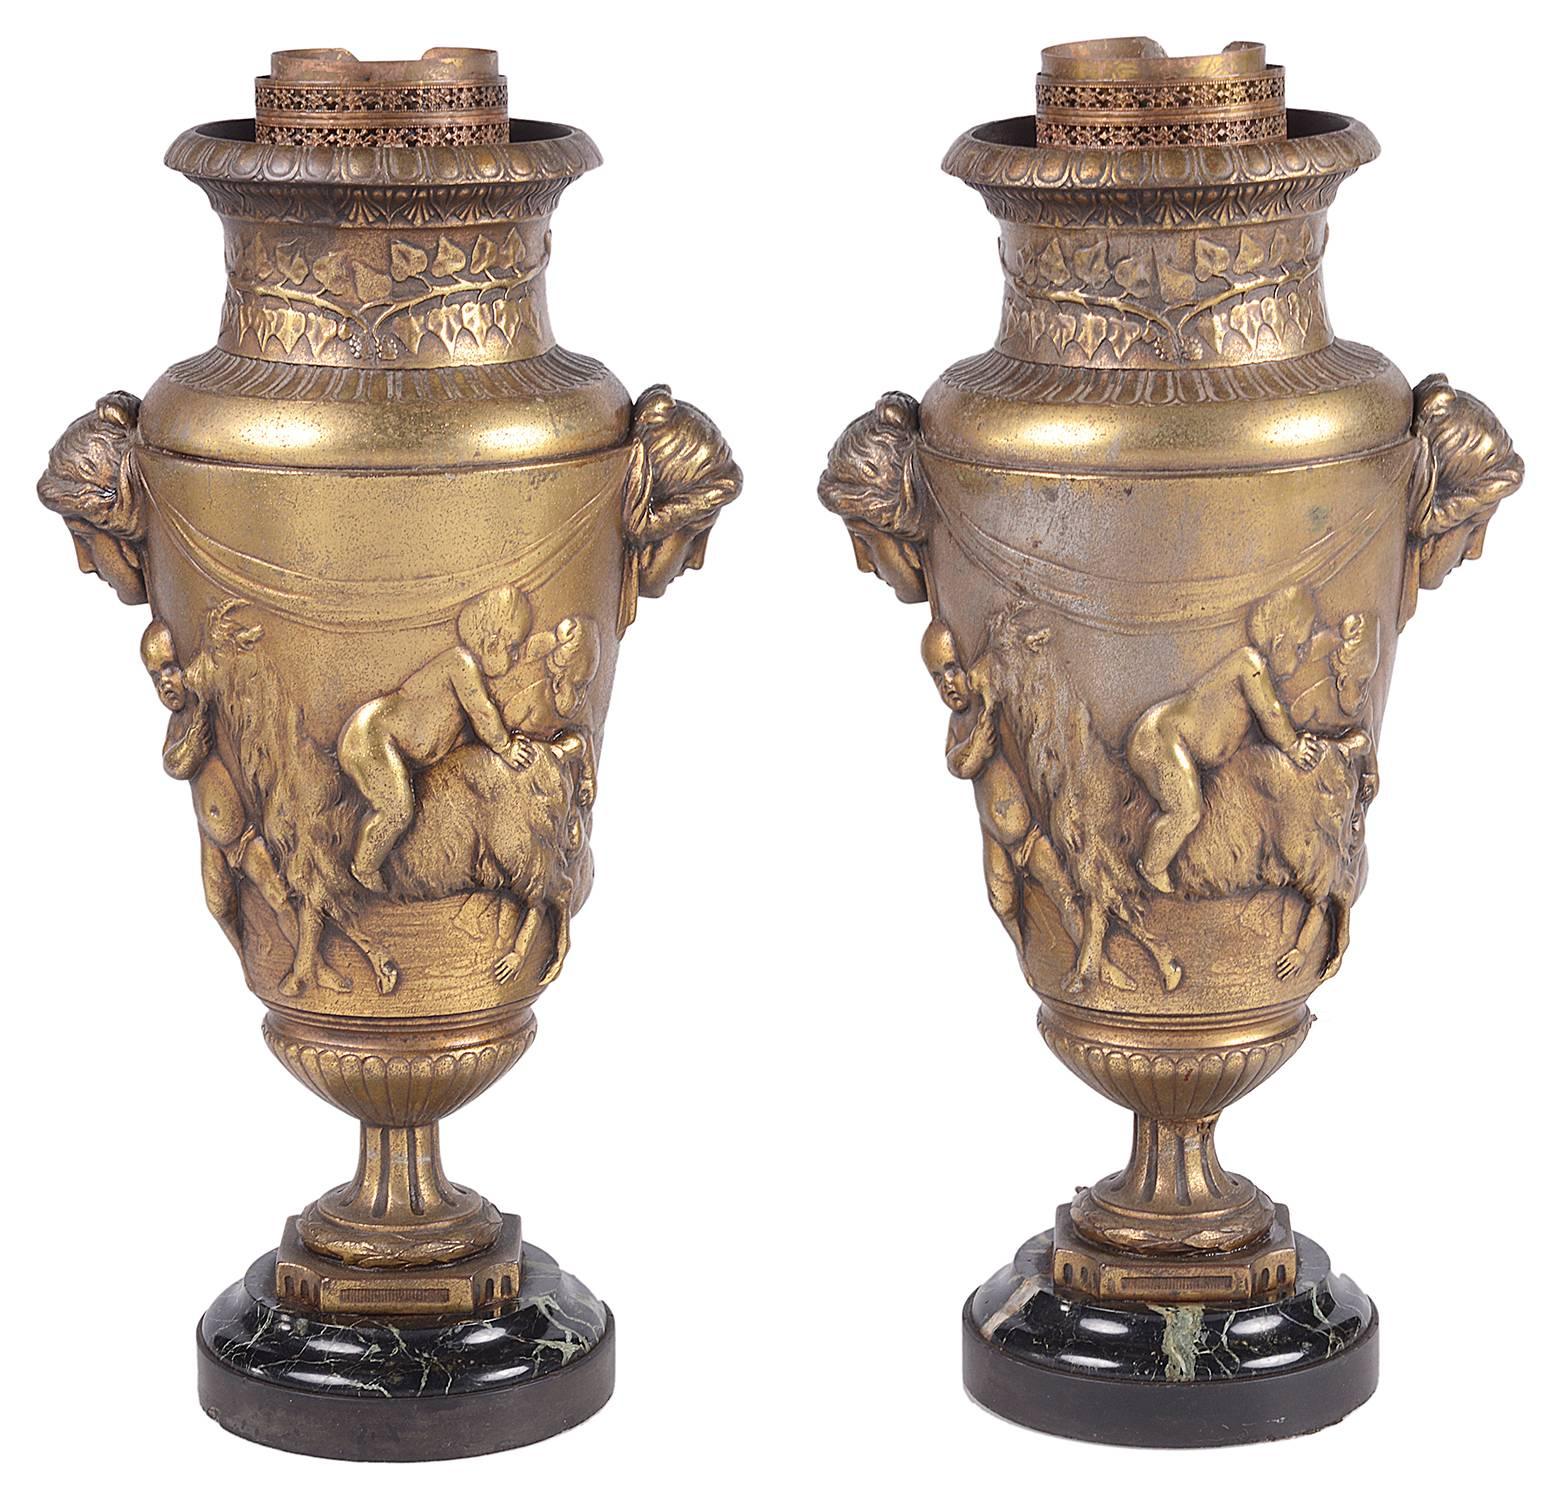 A good quality pair of classical late 19th century bronze lamps, each with raised decoration of children playing beneath swags, vine leaves and maidens masks.
C/C